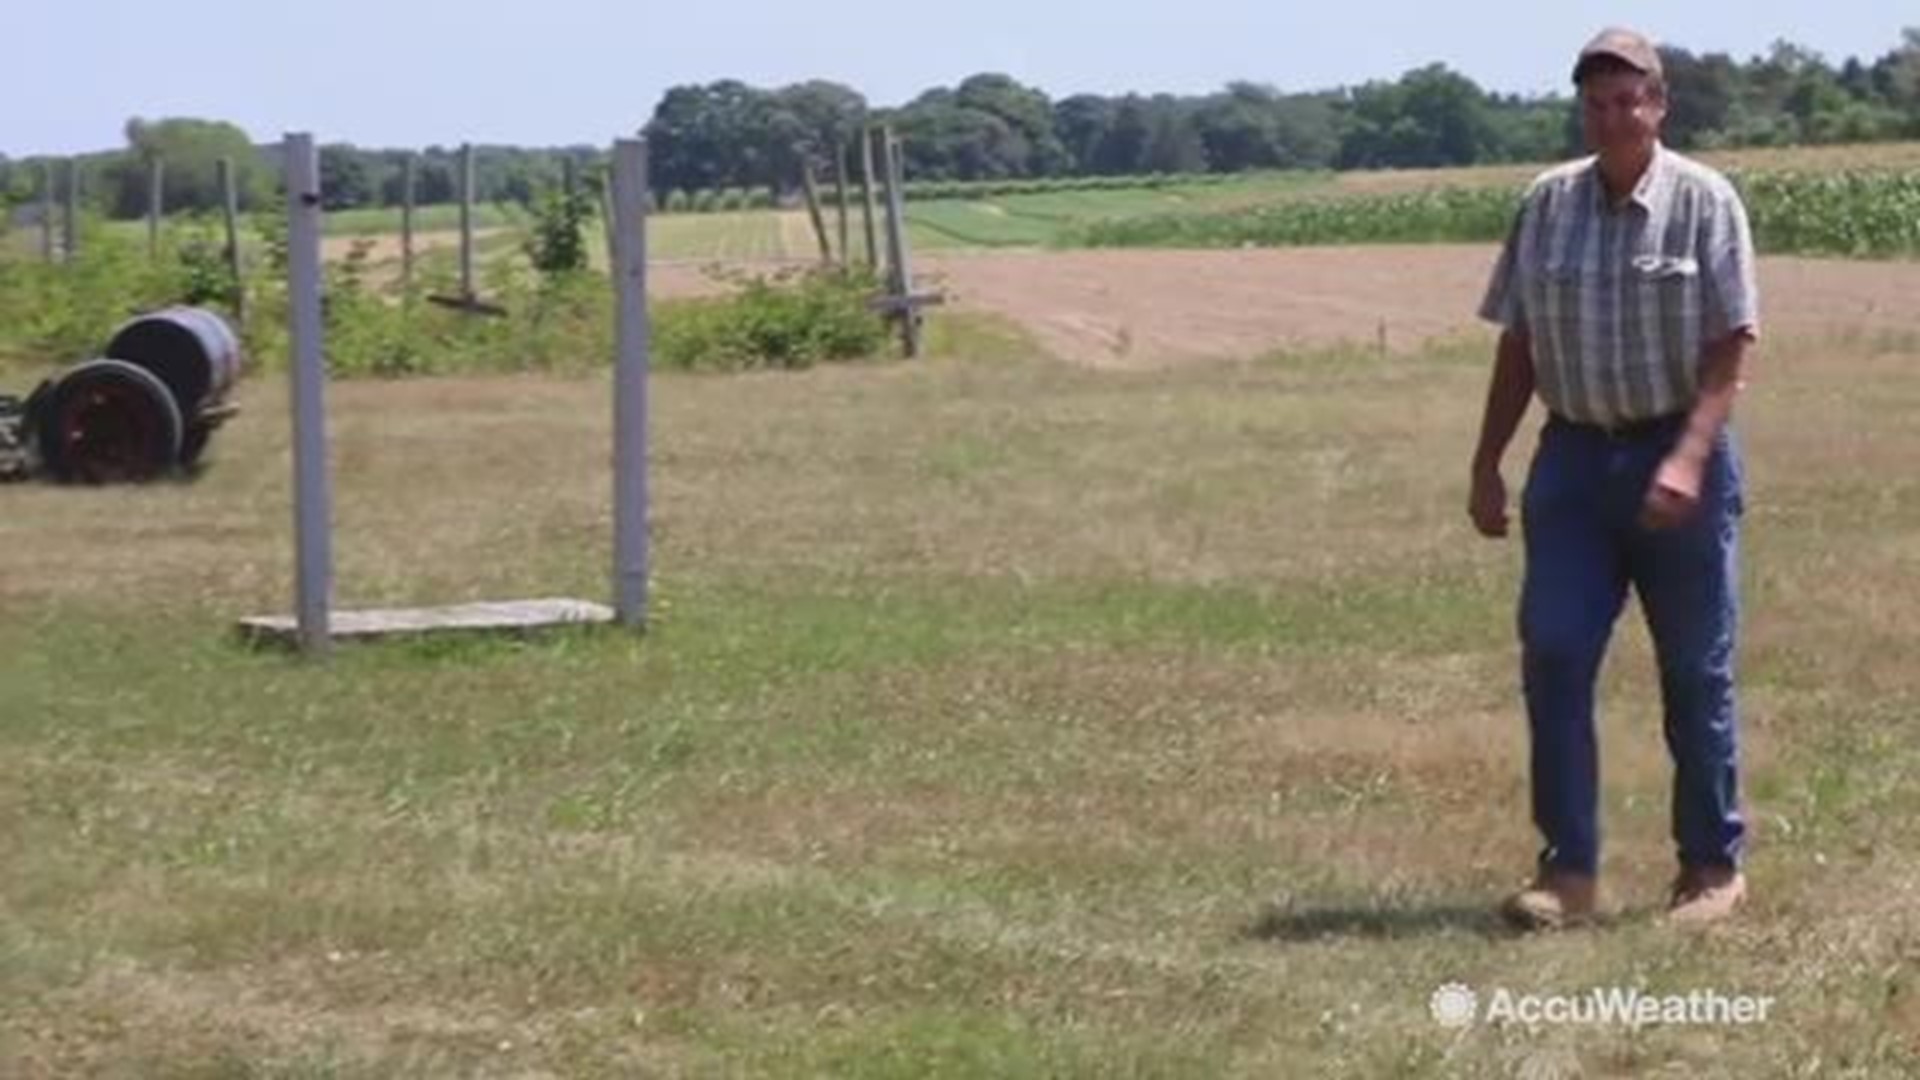 AccuWeather reporter Kena Vernon visits Krupski Farm in Peconic, New York to see how hot weather has been helping the owner thrive with good crops this year.